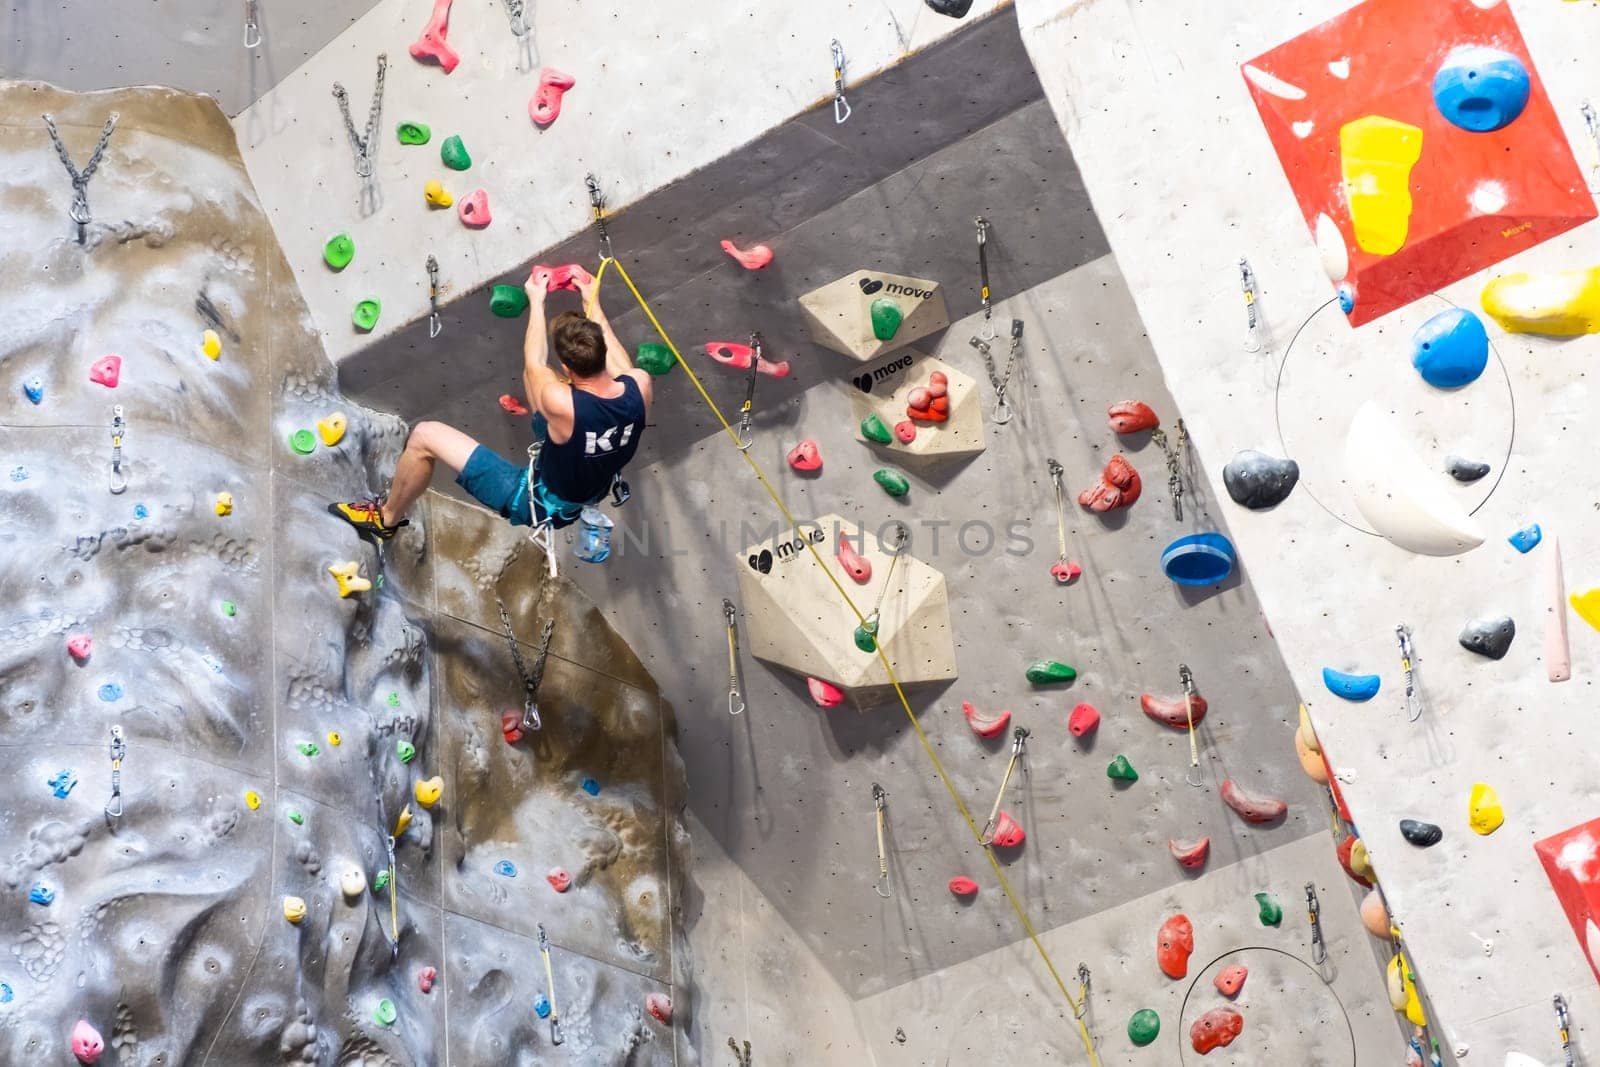 The climber trains on the artificial rock wall with insurance in bouldering gym, April 2022, Prague, Czech Republic.